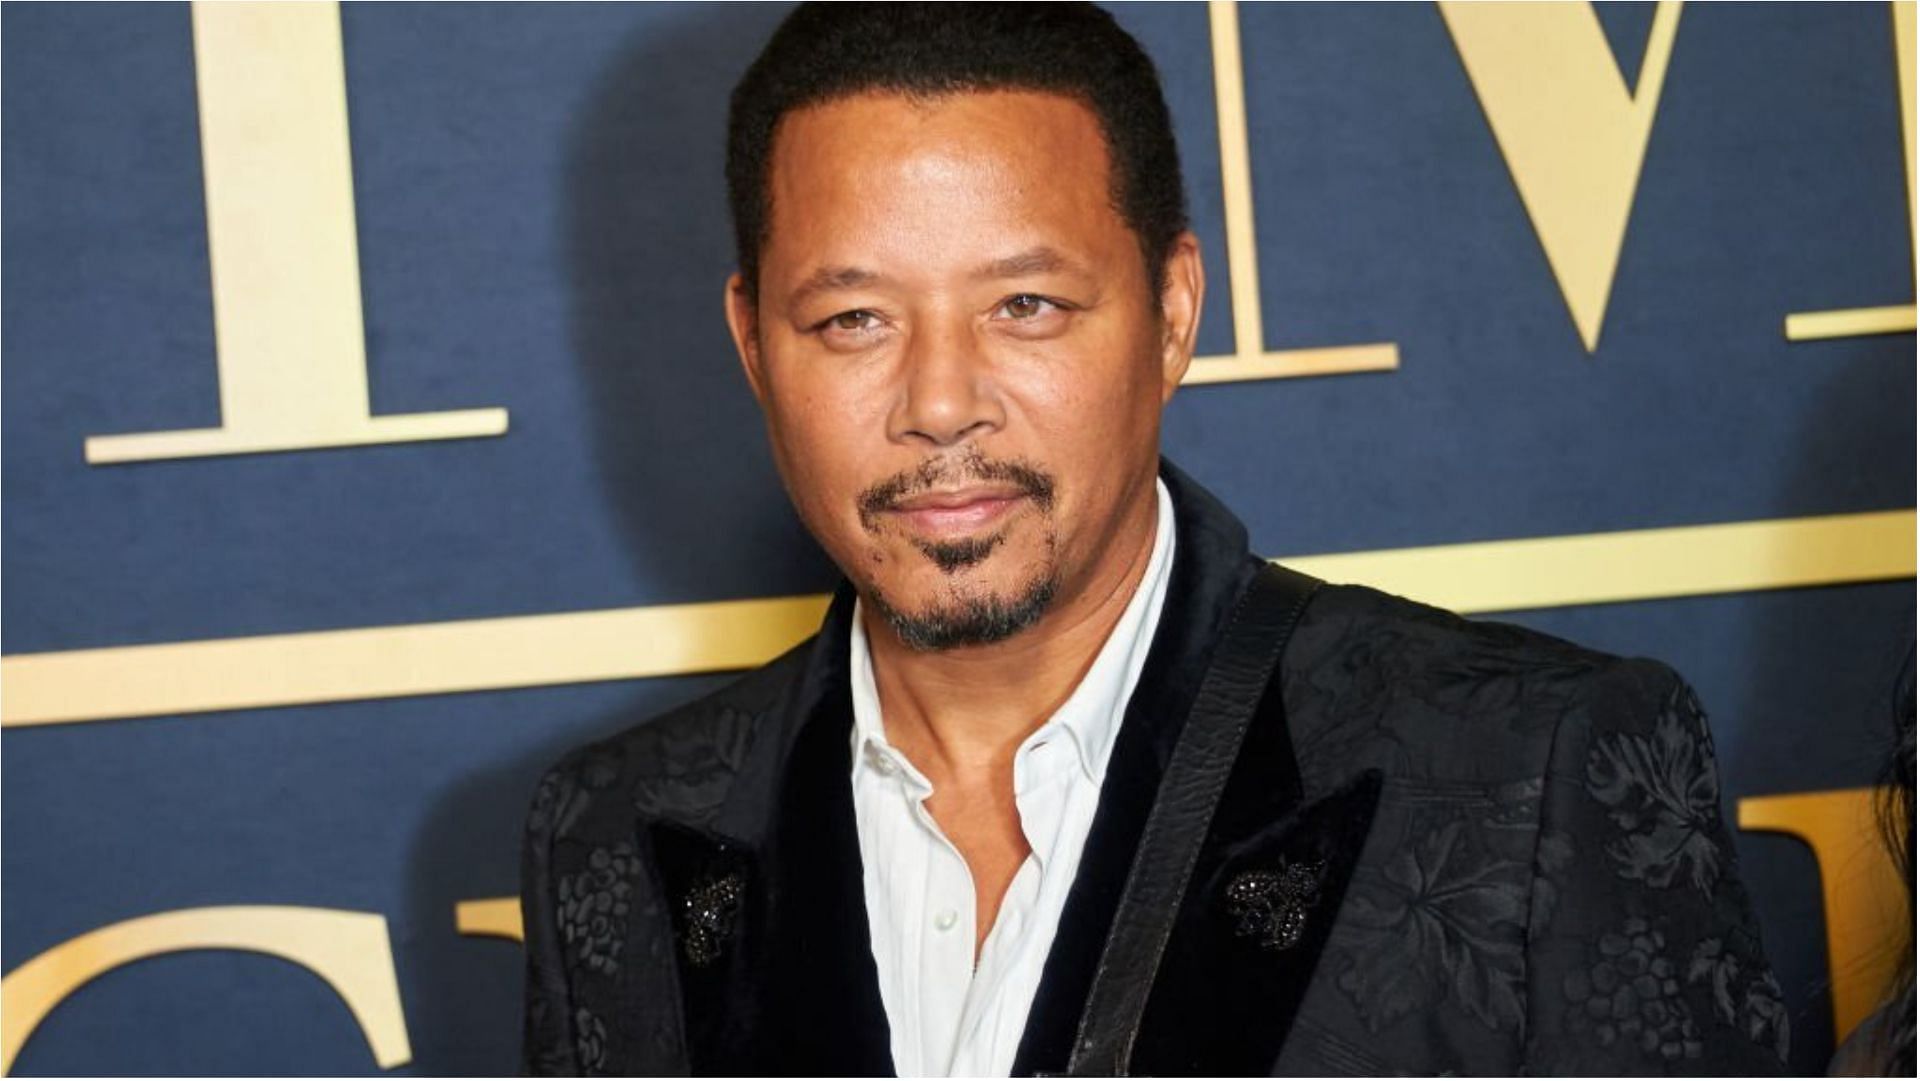 Terrence Howard has announced complete retirement from acting (Image via Unique Nicole/Getty Images)